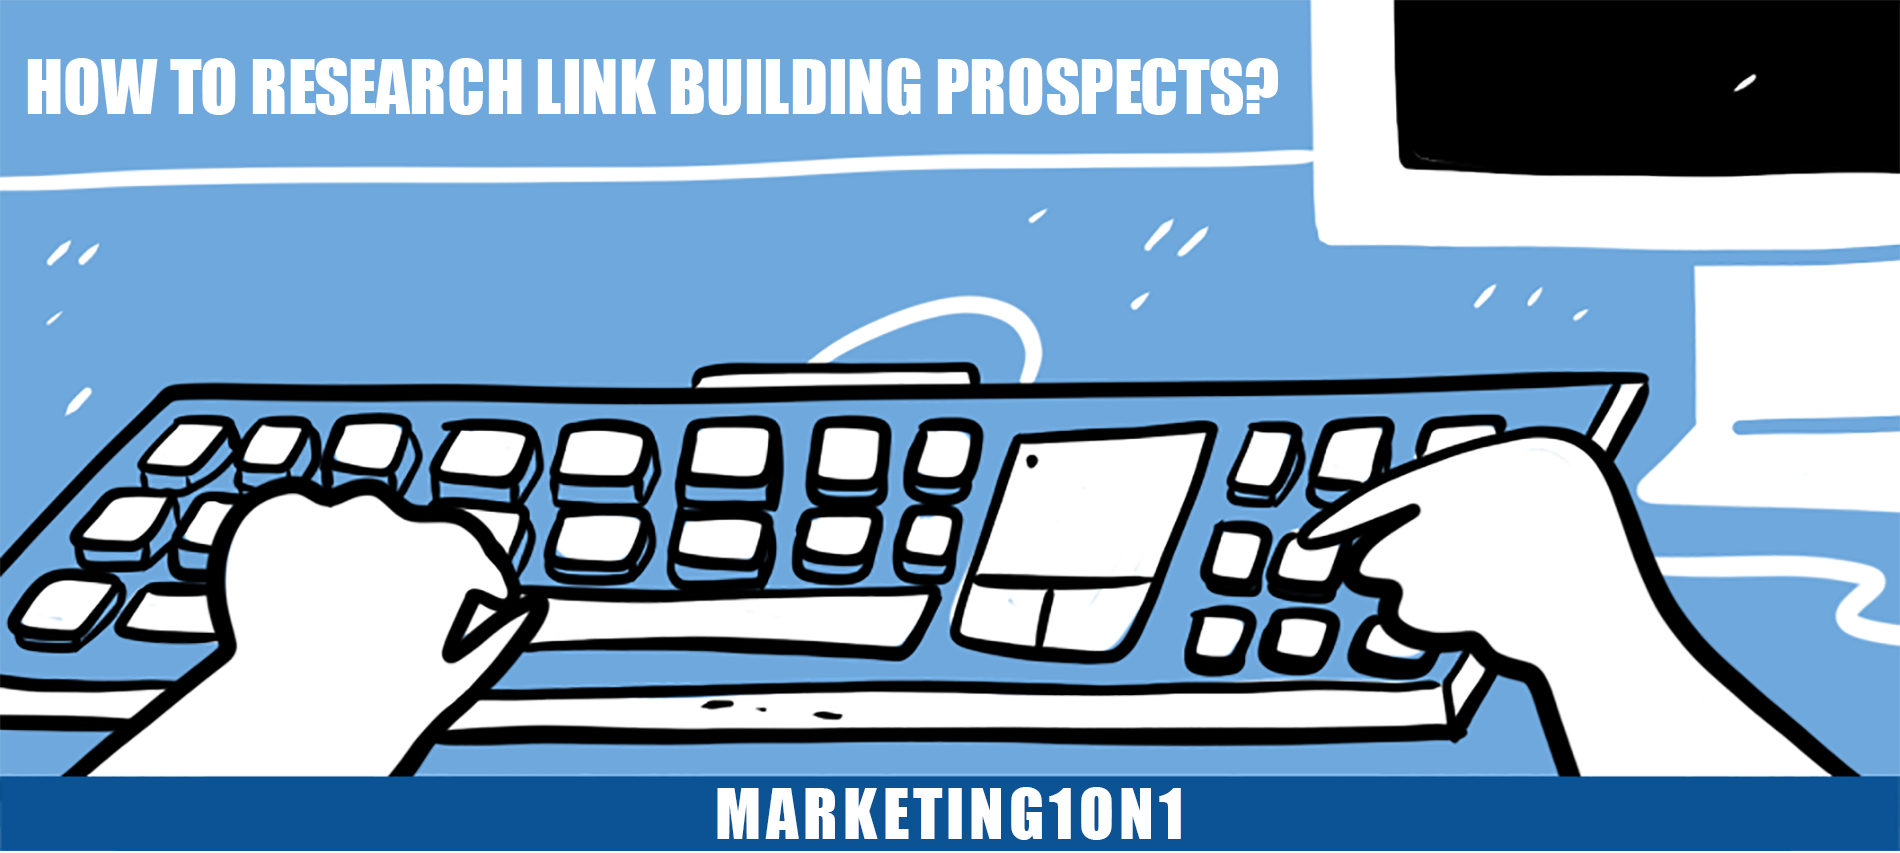 How to research link building prospects?